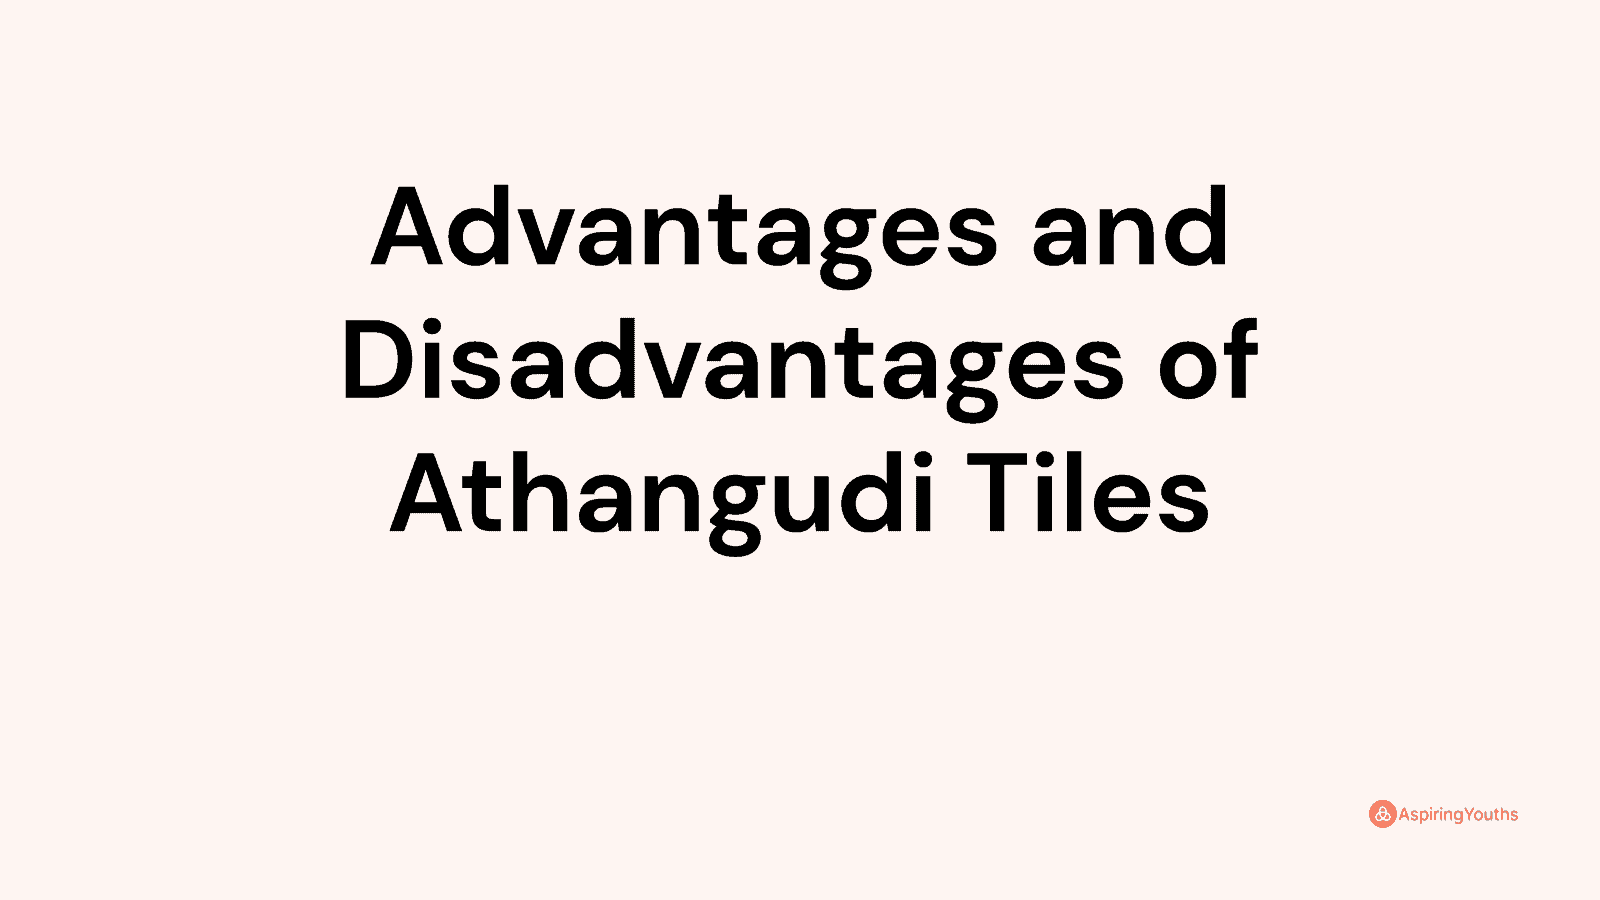 Advantages and disadvantages of Athangudi Tiles